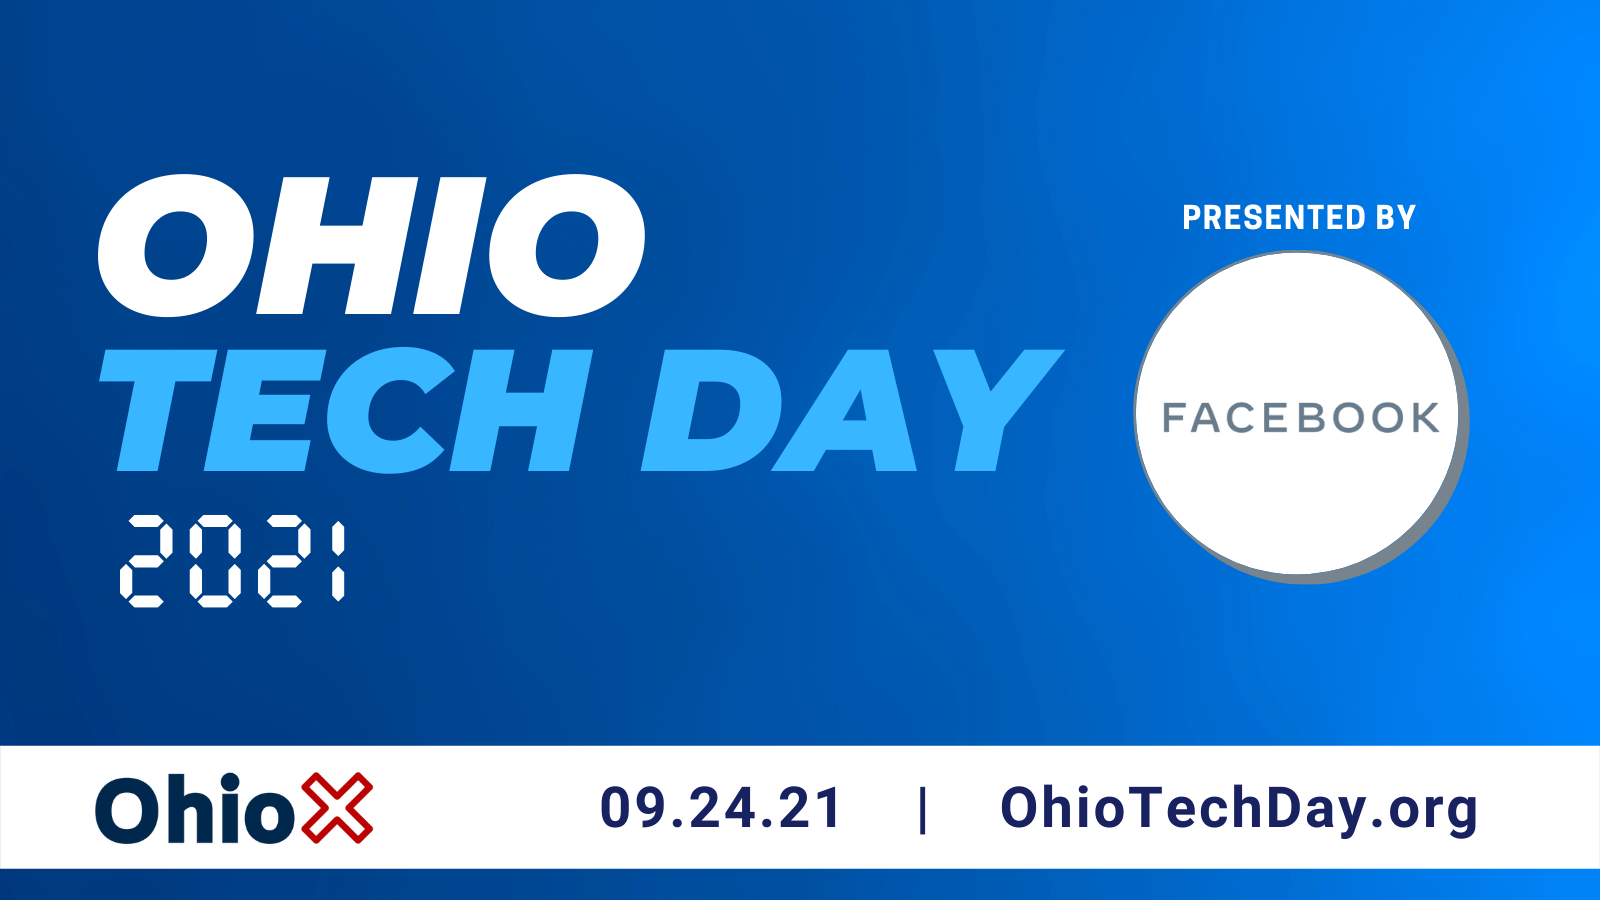 Ohio-Tech-Day-midwest-tech-events